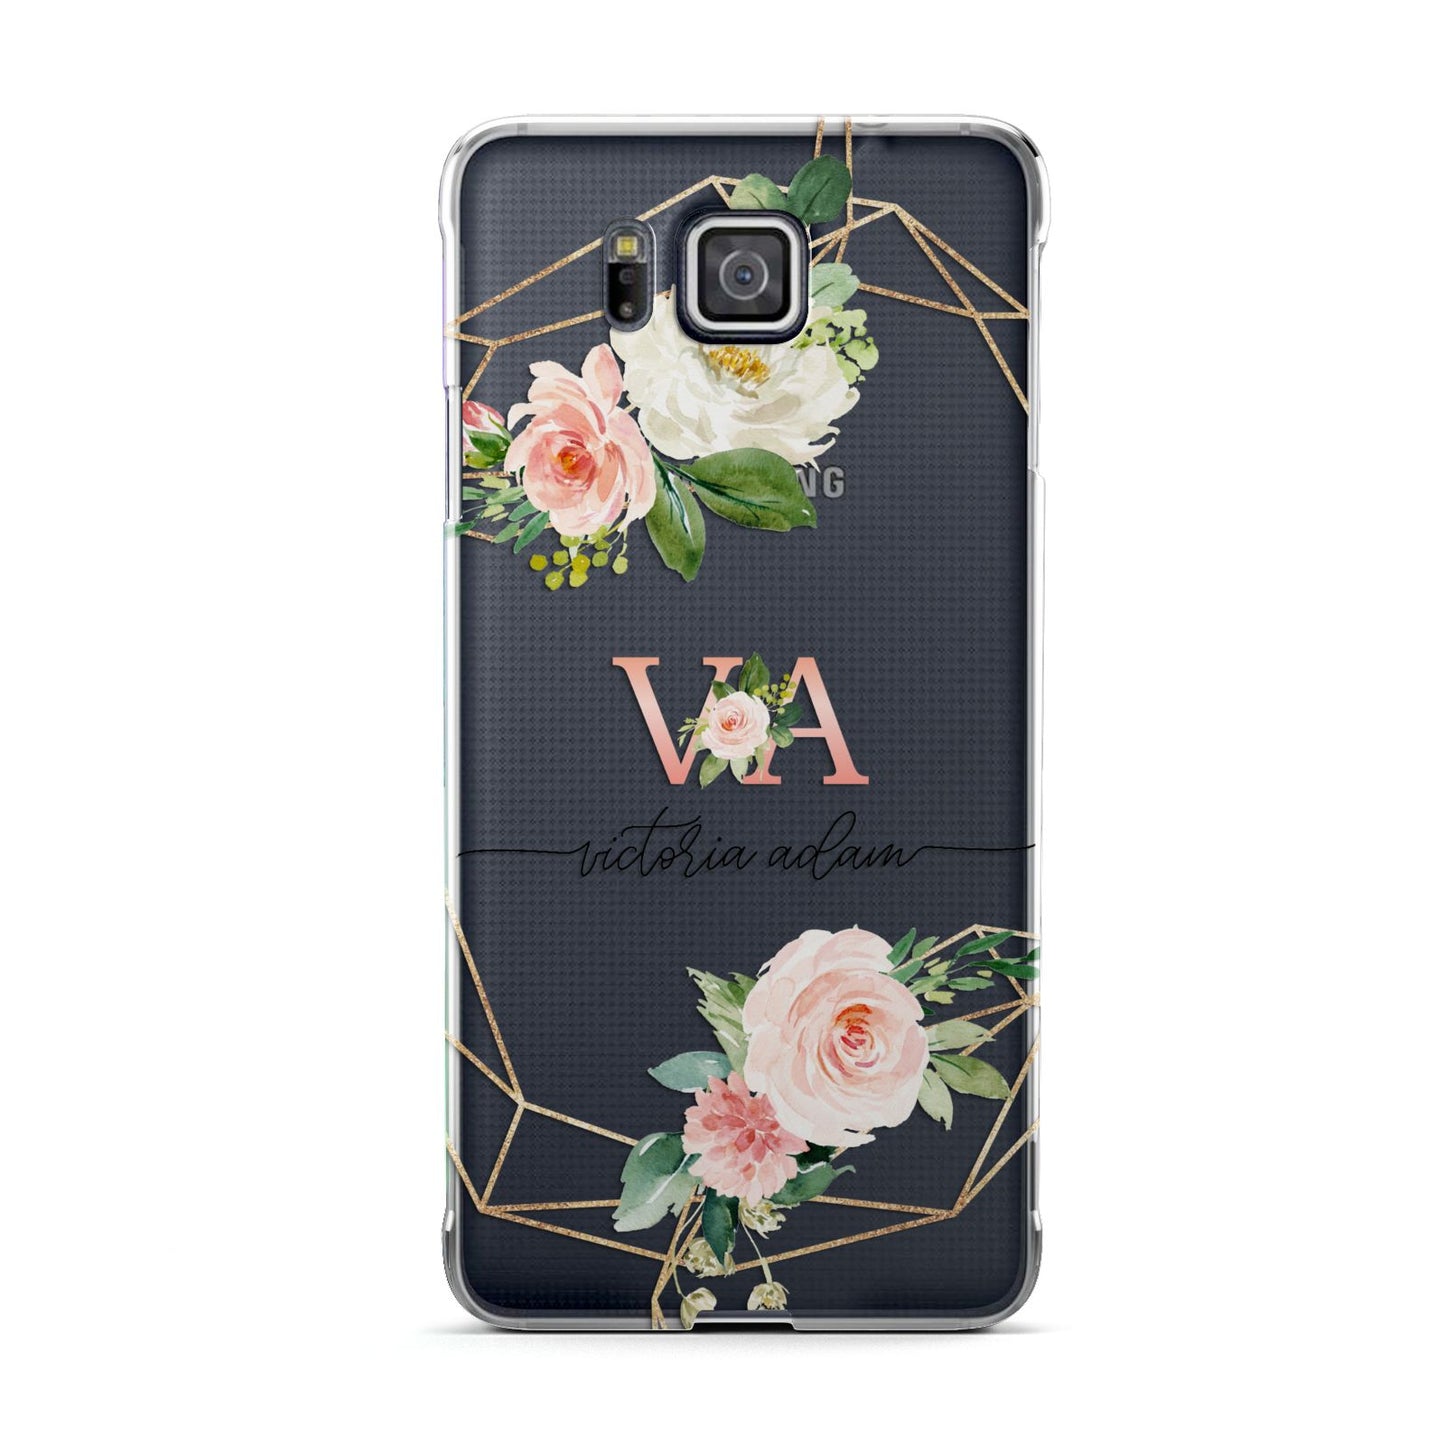 Blush Pink Rose Floral Personalised Samsung Galaxy Alpha Case